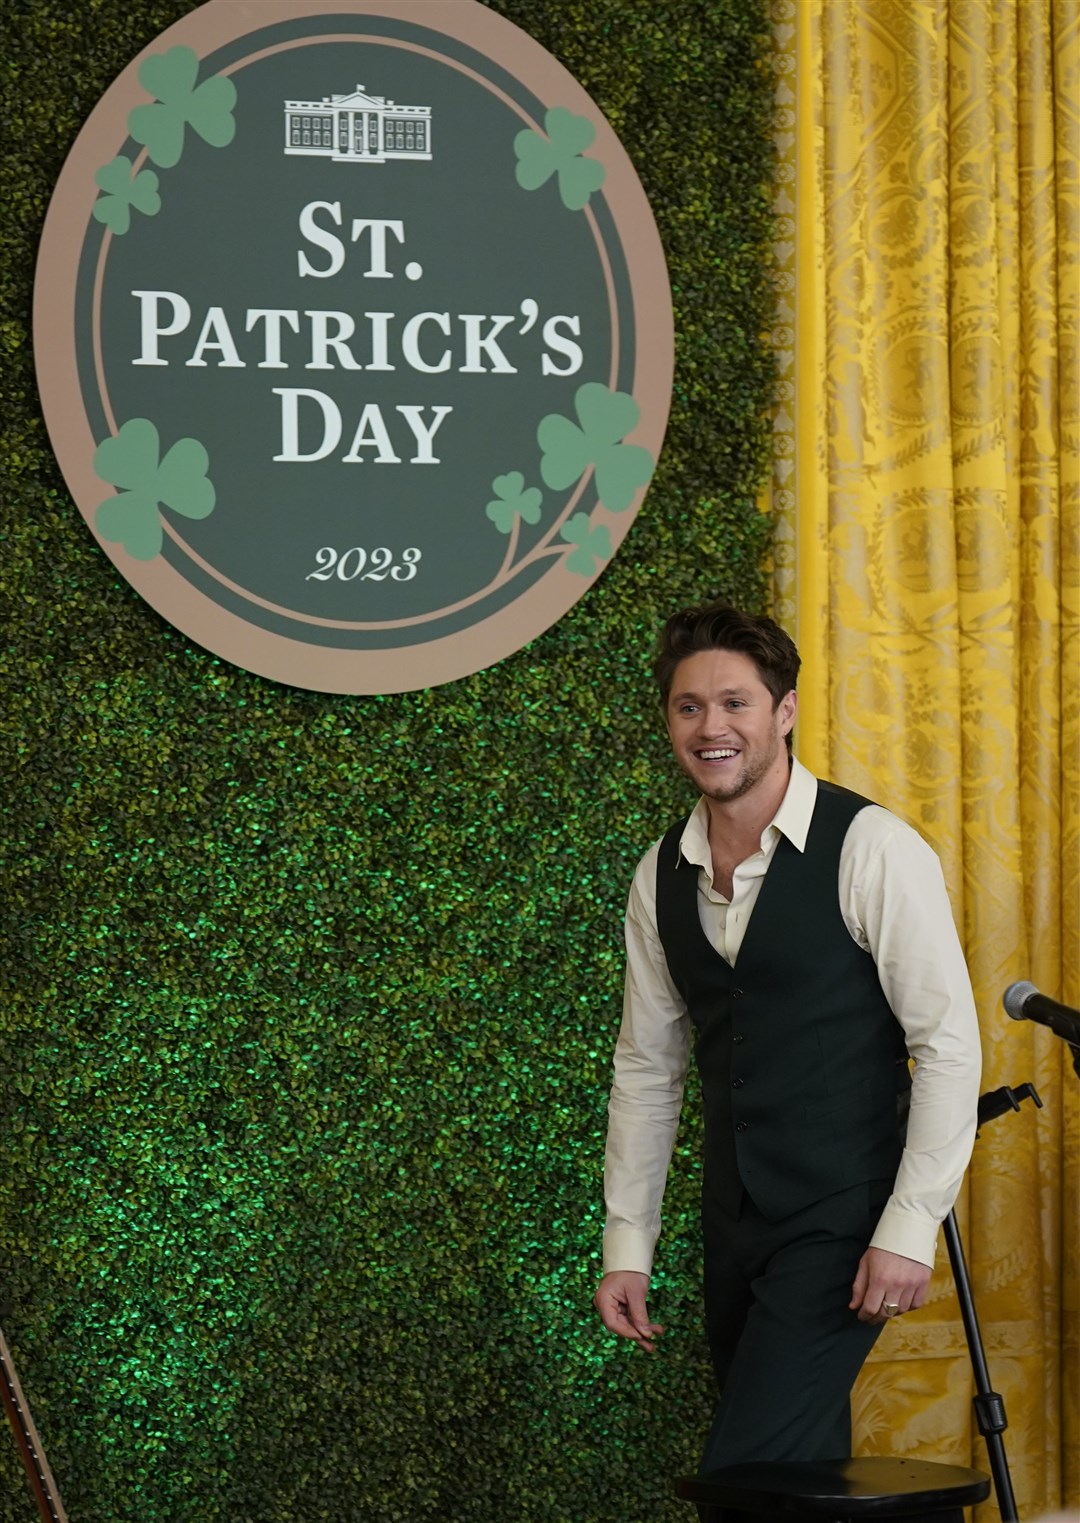 Niall Horan during a St Patrick’s Day Celebration reception (Niall Carson/PA)